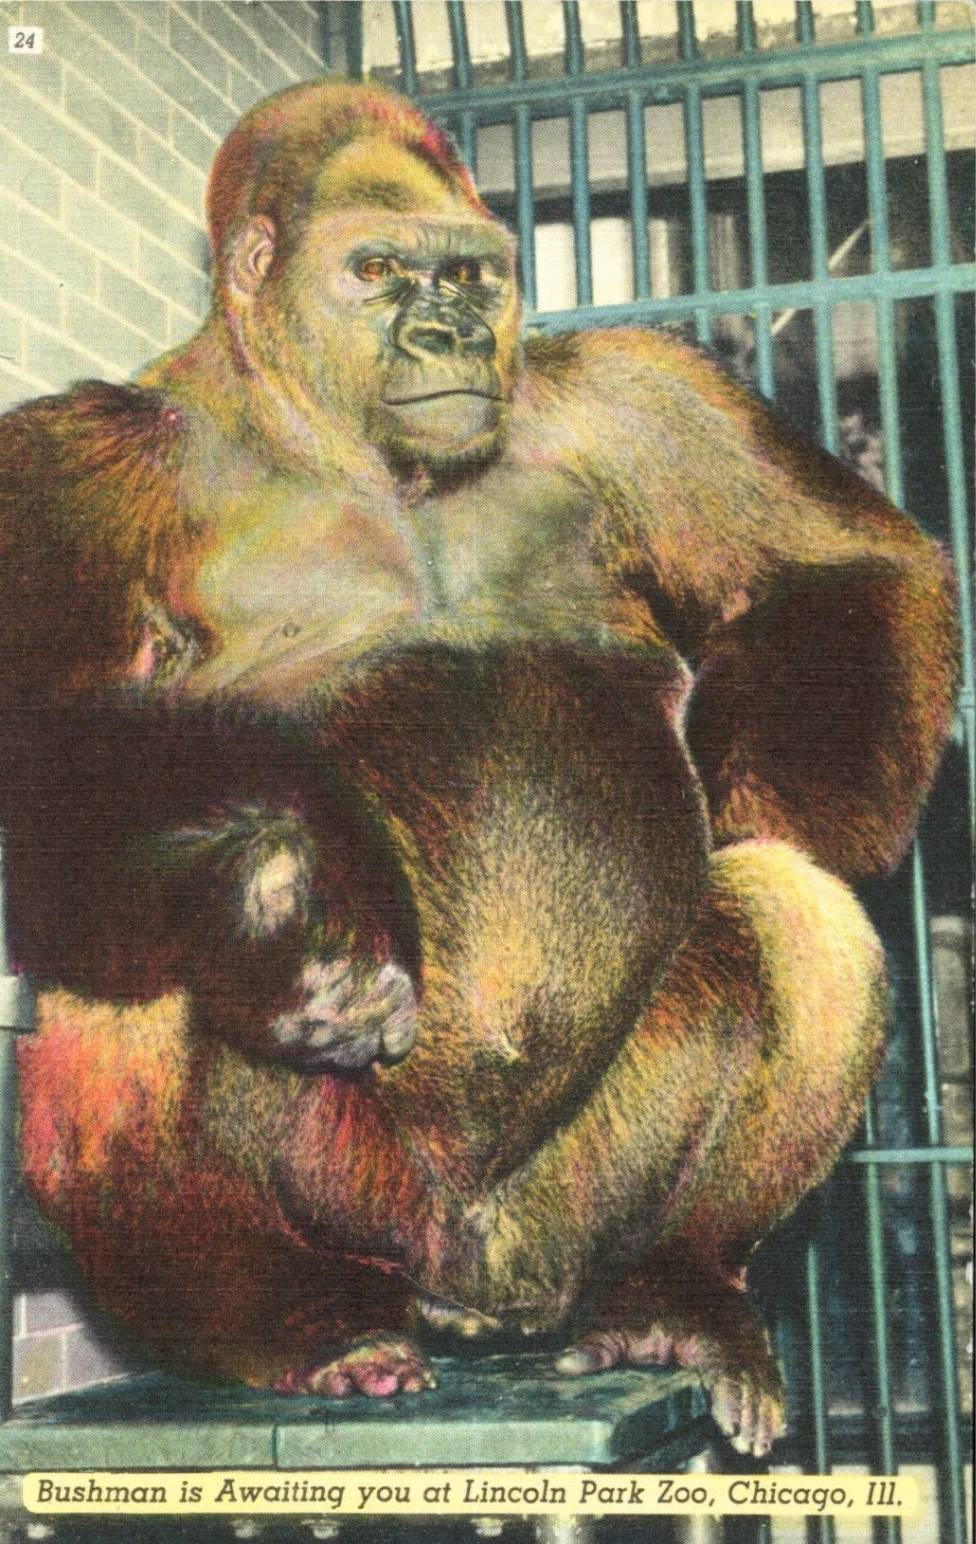 POSTCARD - CHICAGO - LINCOLN PARK ZOO - BUSHMAN SITTING IN HIS CAGE - 1951